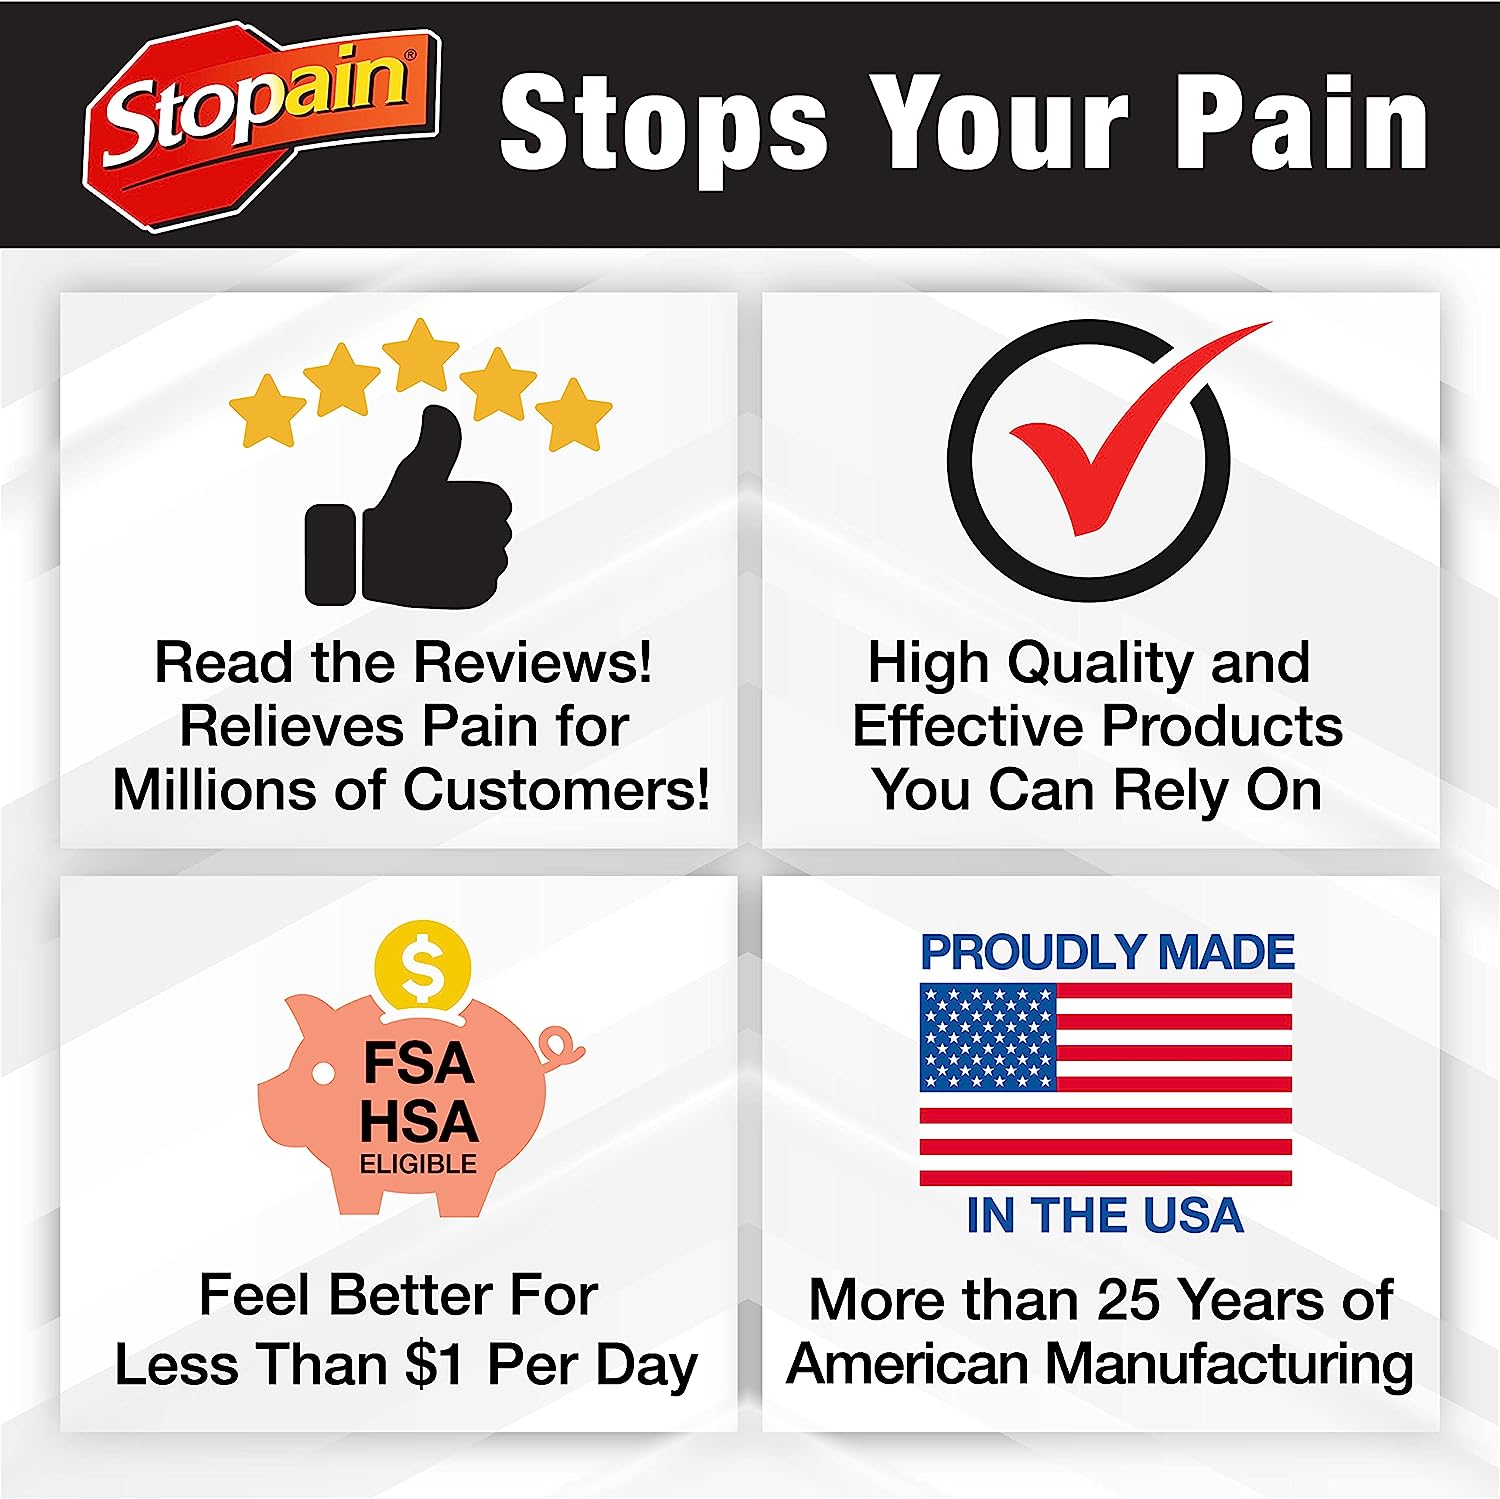 Stopain Pain Relief Spray 4oz (2 Pack) USA Made, Max Strength Fast Acting with MSM, Glucosamine, Menthol for Arthritis, Lower Back, Neck, HSA FSA Approved Topical Analgesic Products